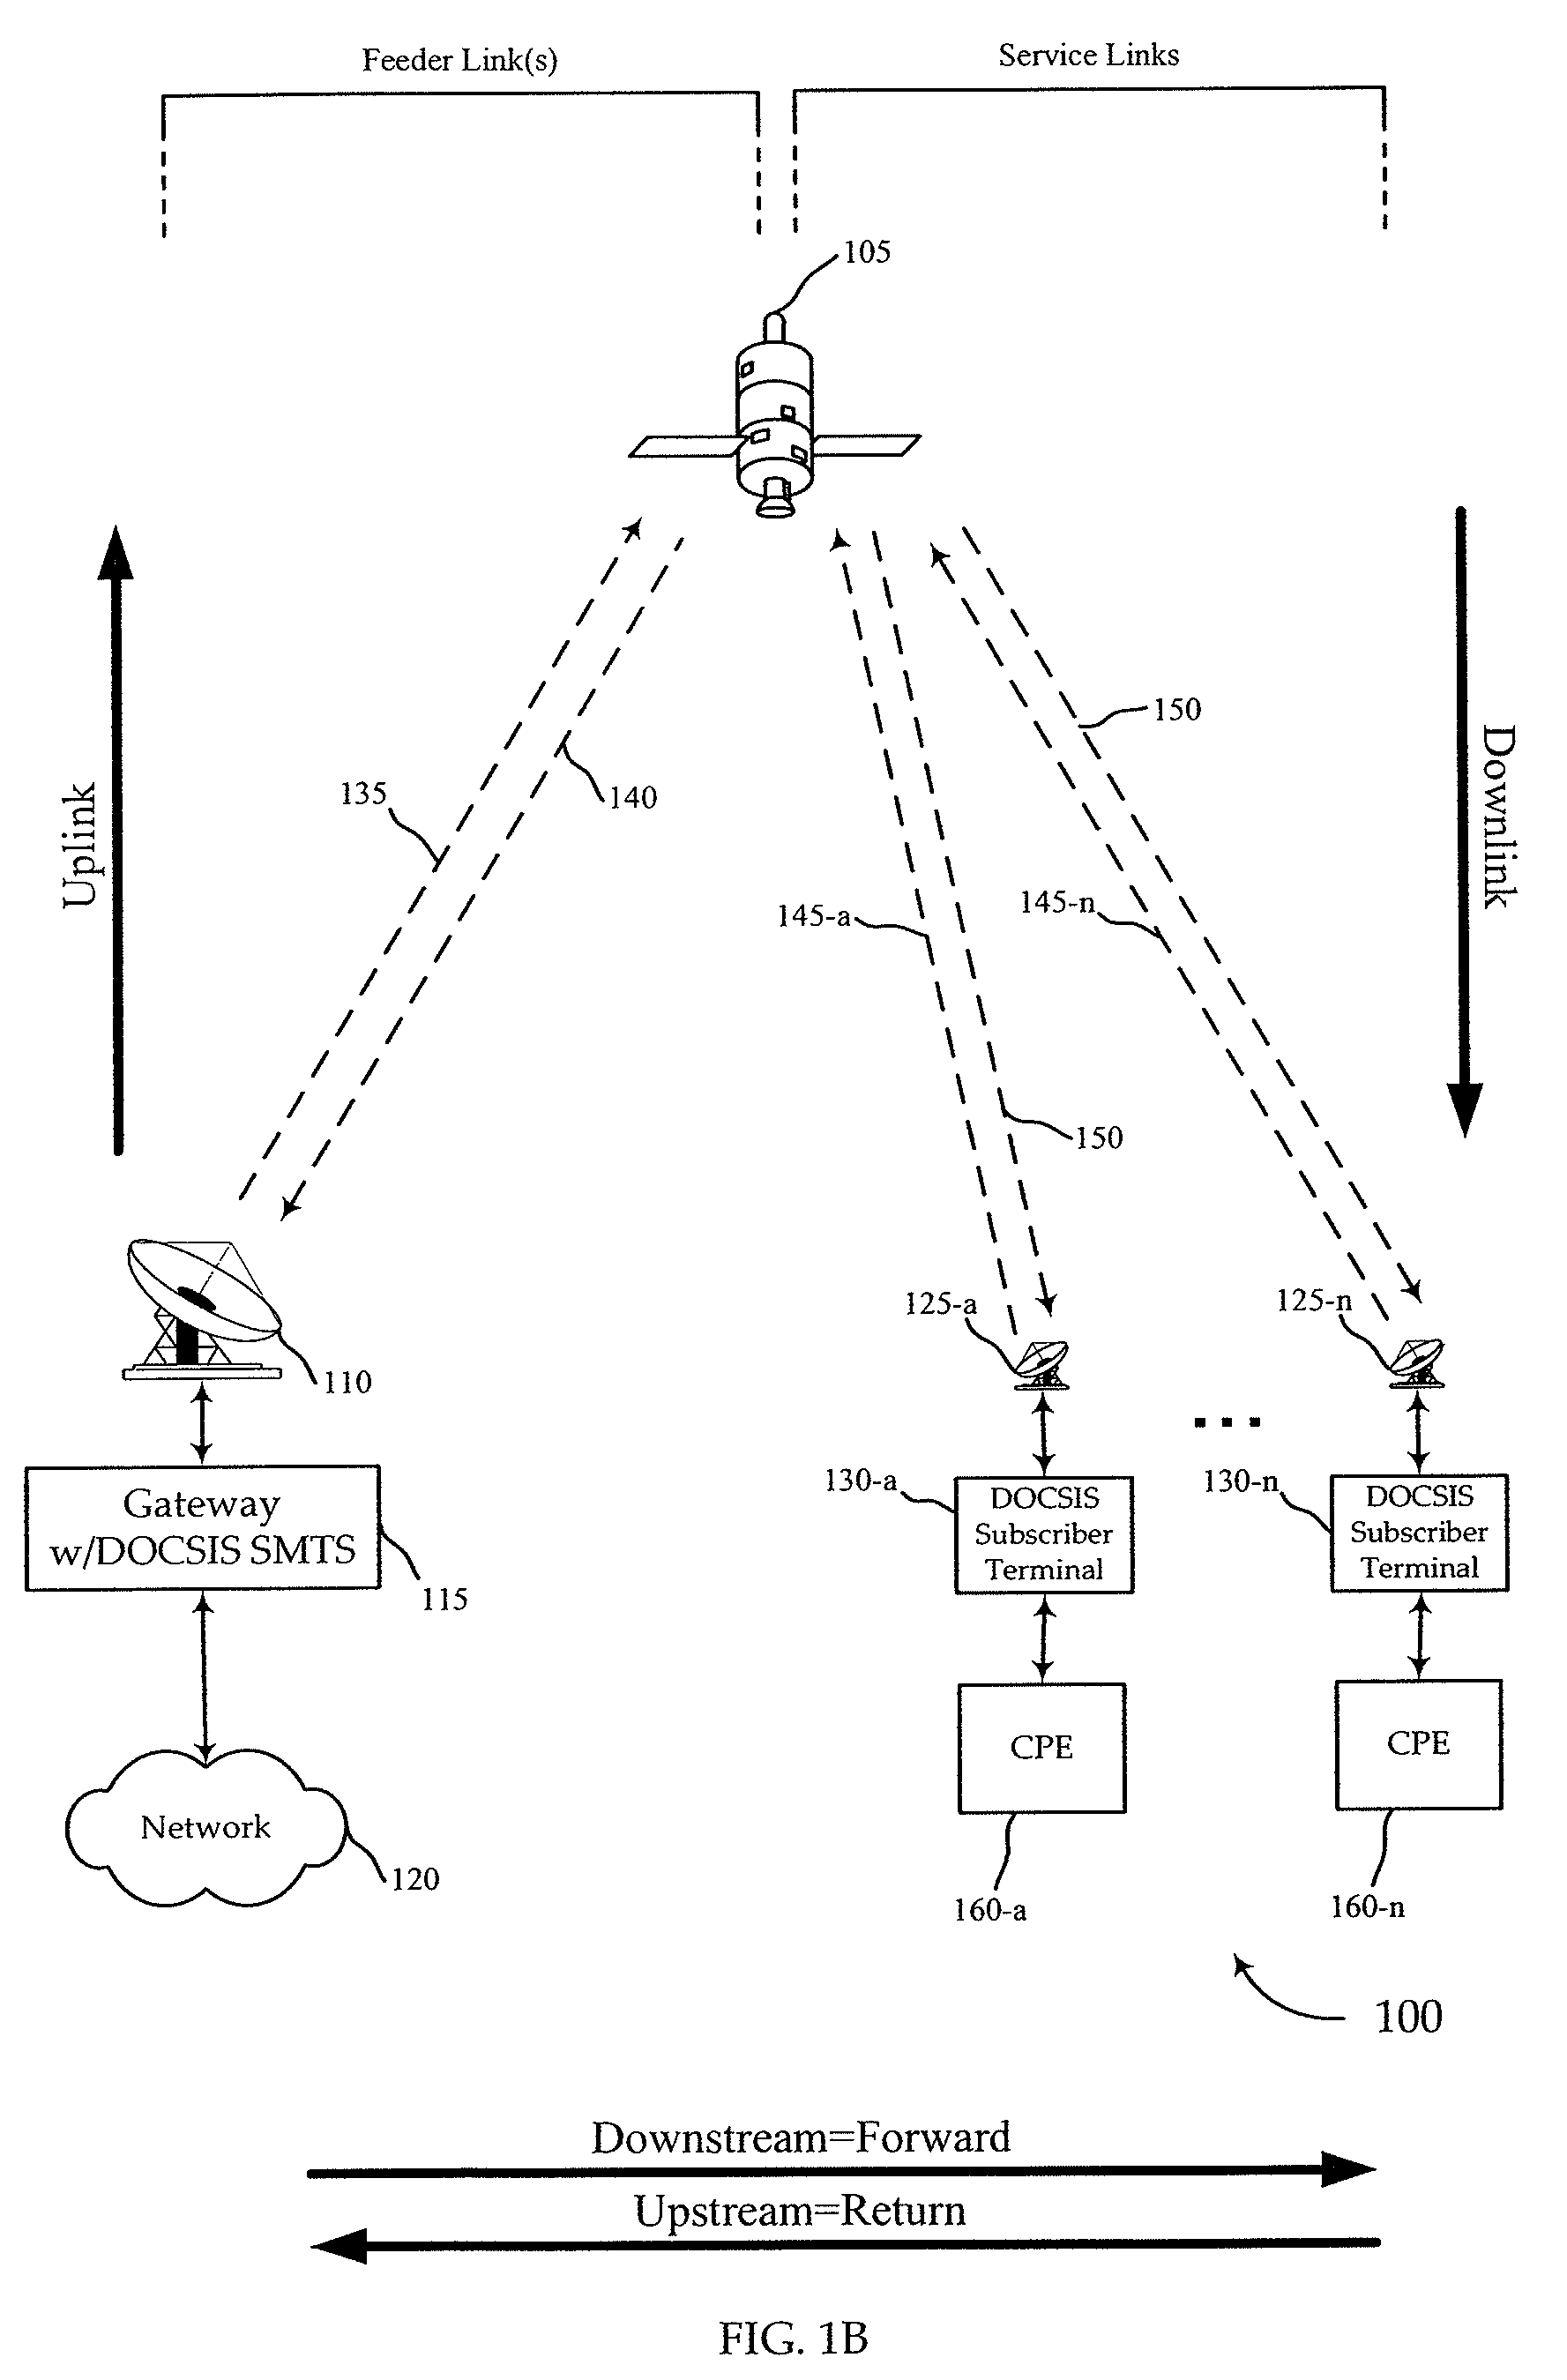 Web-bulk transfer preallocation of upstream resources in a satellite communication system